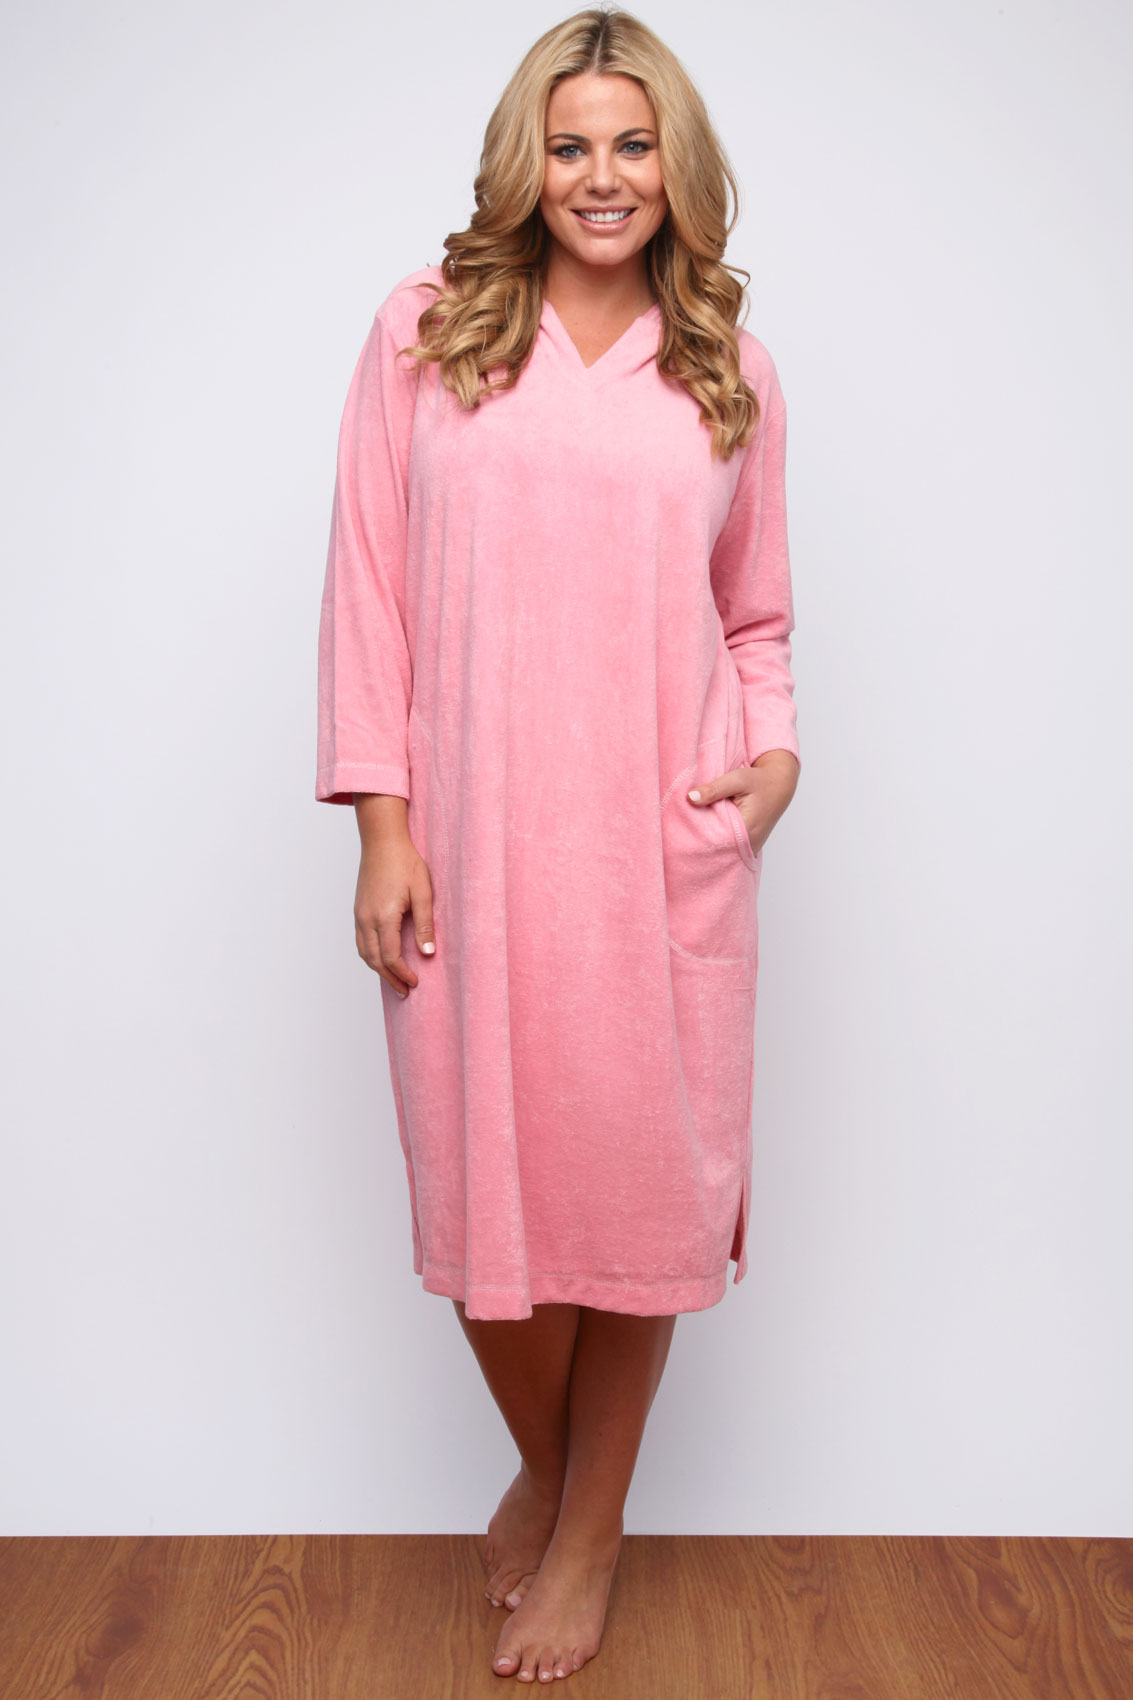 Pink Hooded Towelling Dress plus size 14,16,18,20,22,24,26,28,30,32,34,36